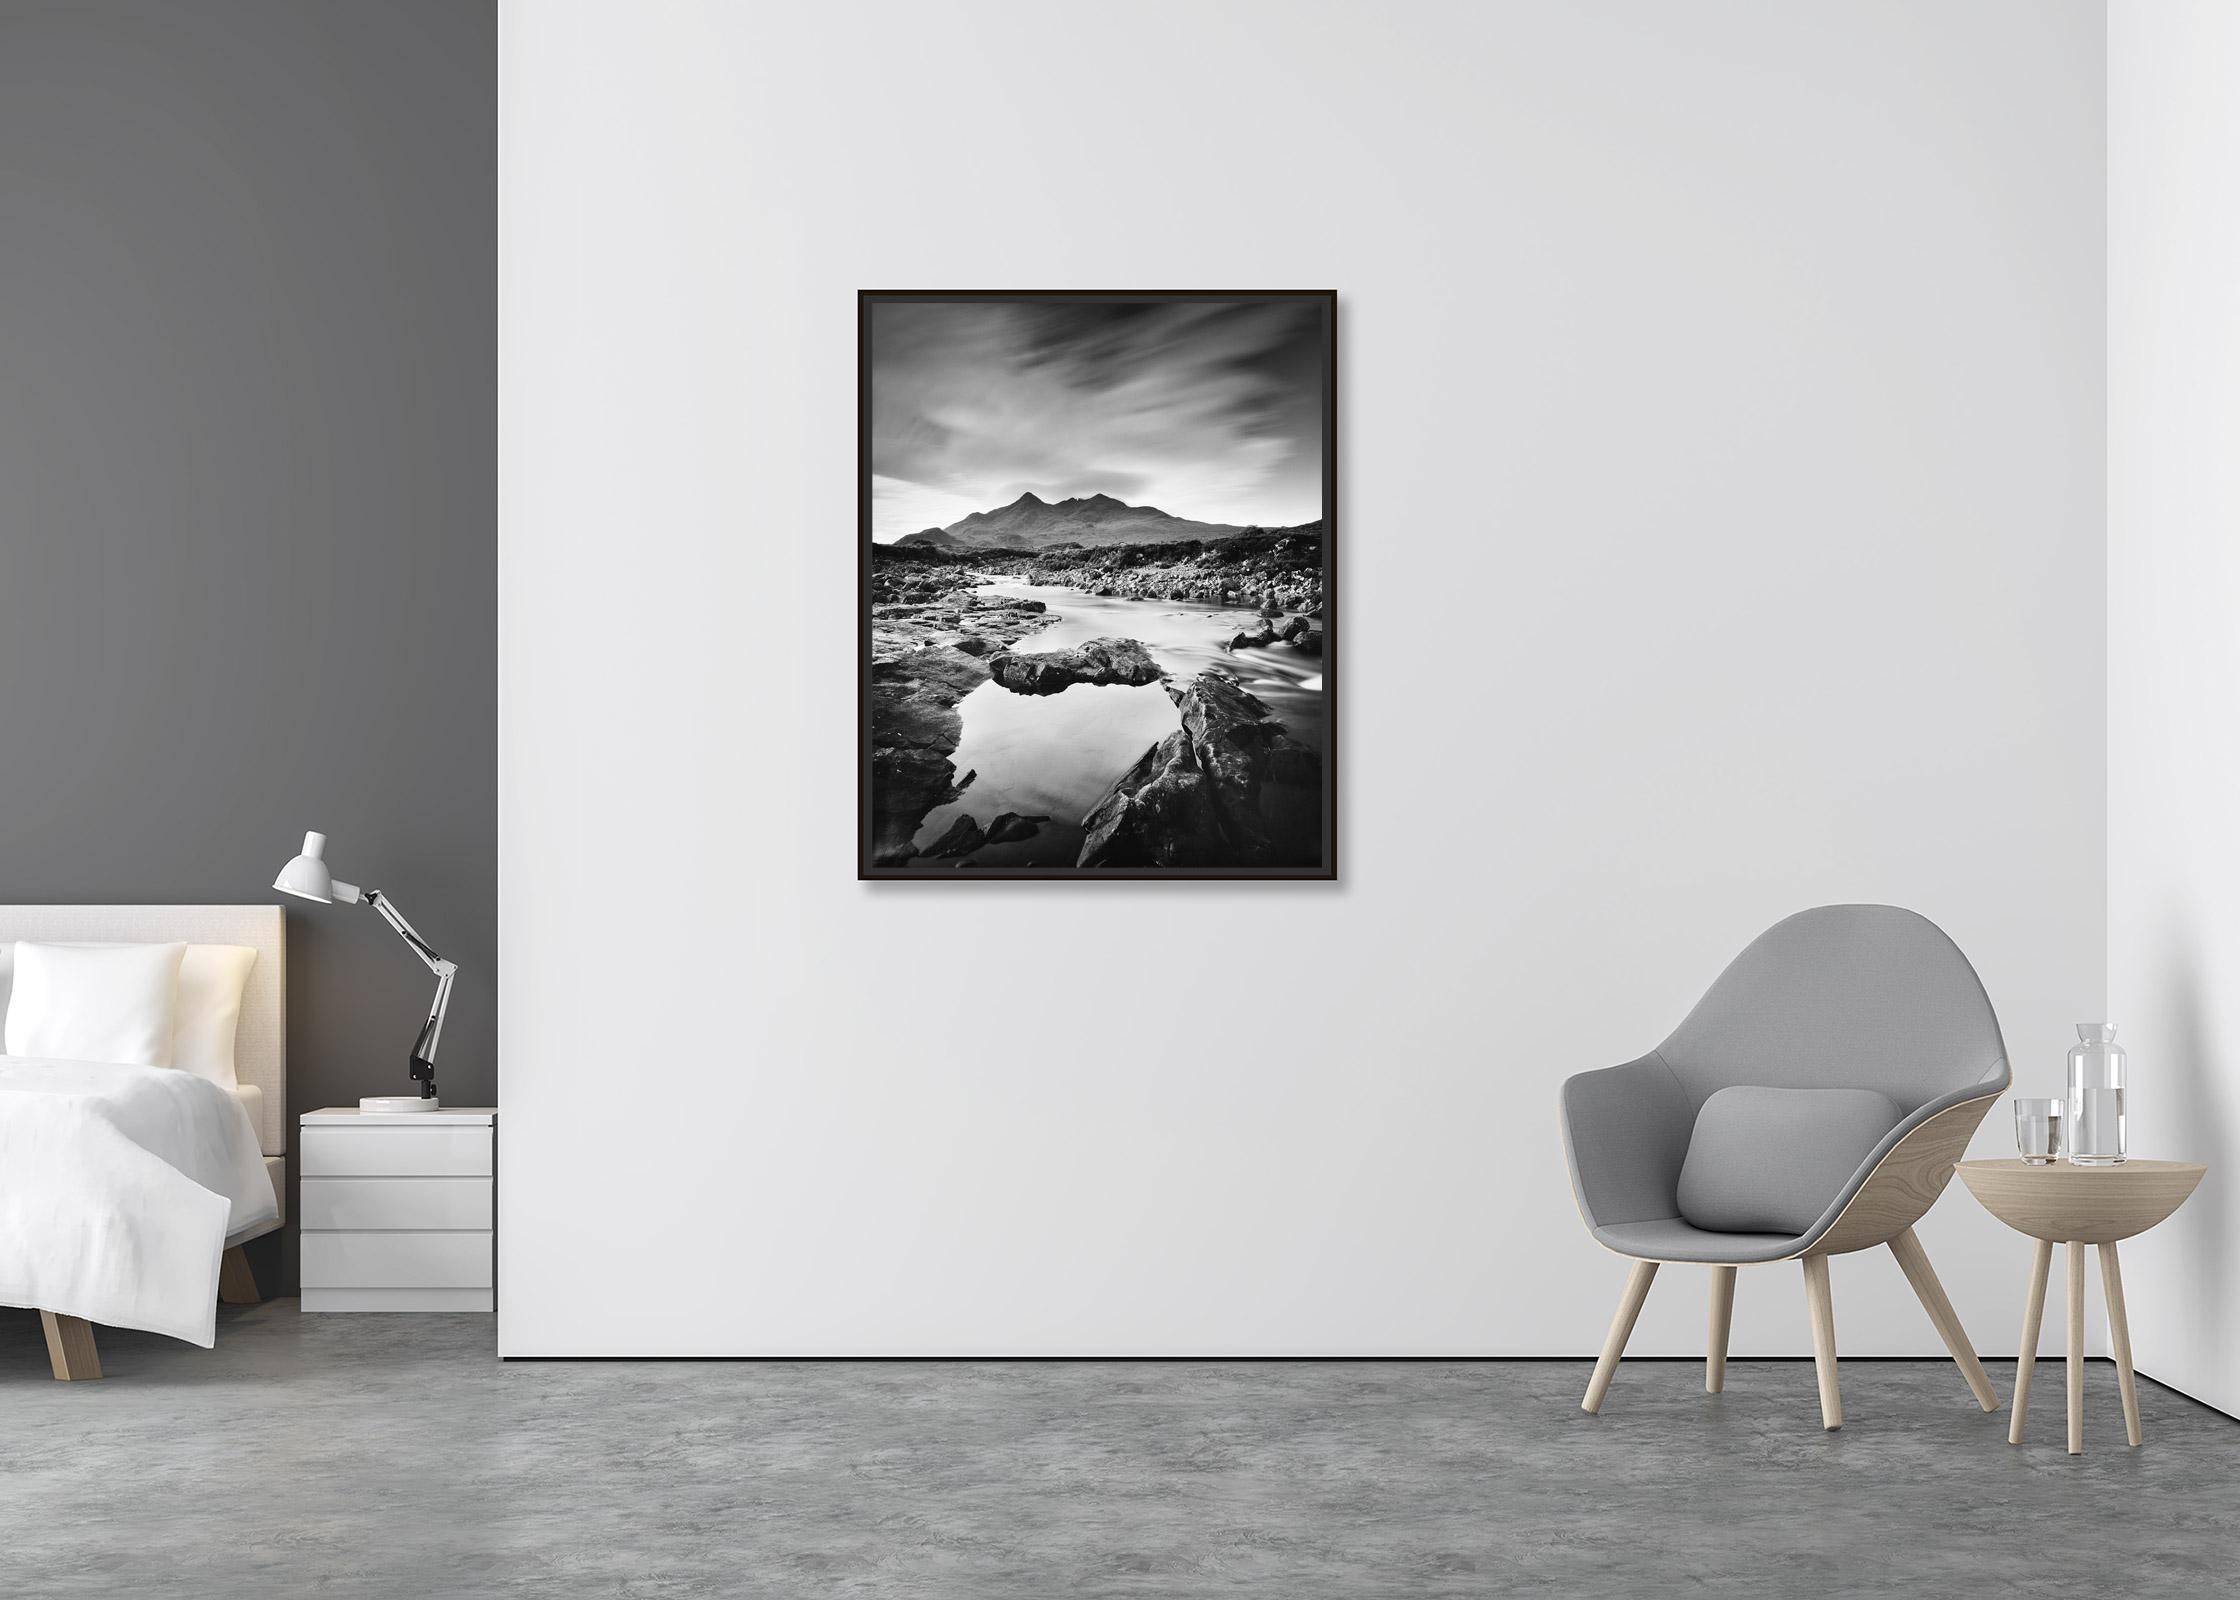 Black Cuillin Hills Mountains Scotland black and white landscape art photography - Contemporary Photograph by Gerald Berghammer